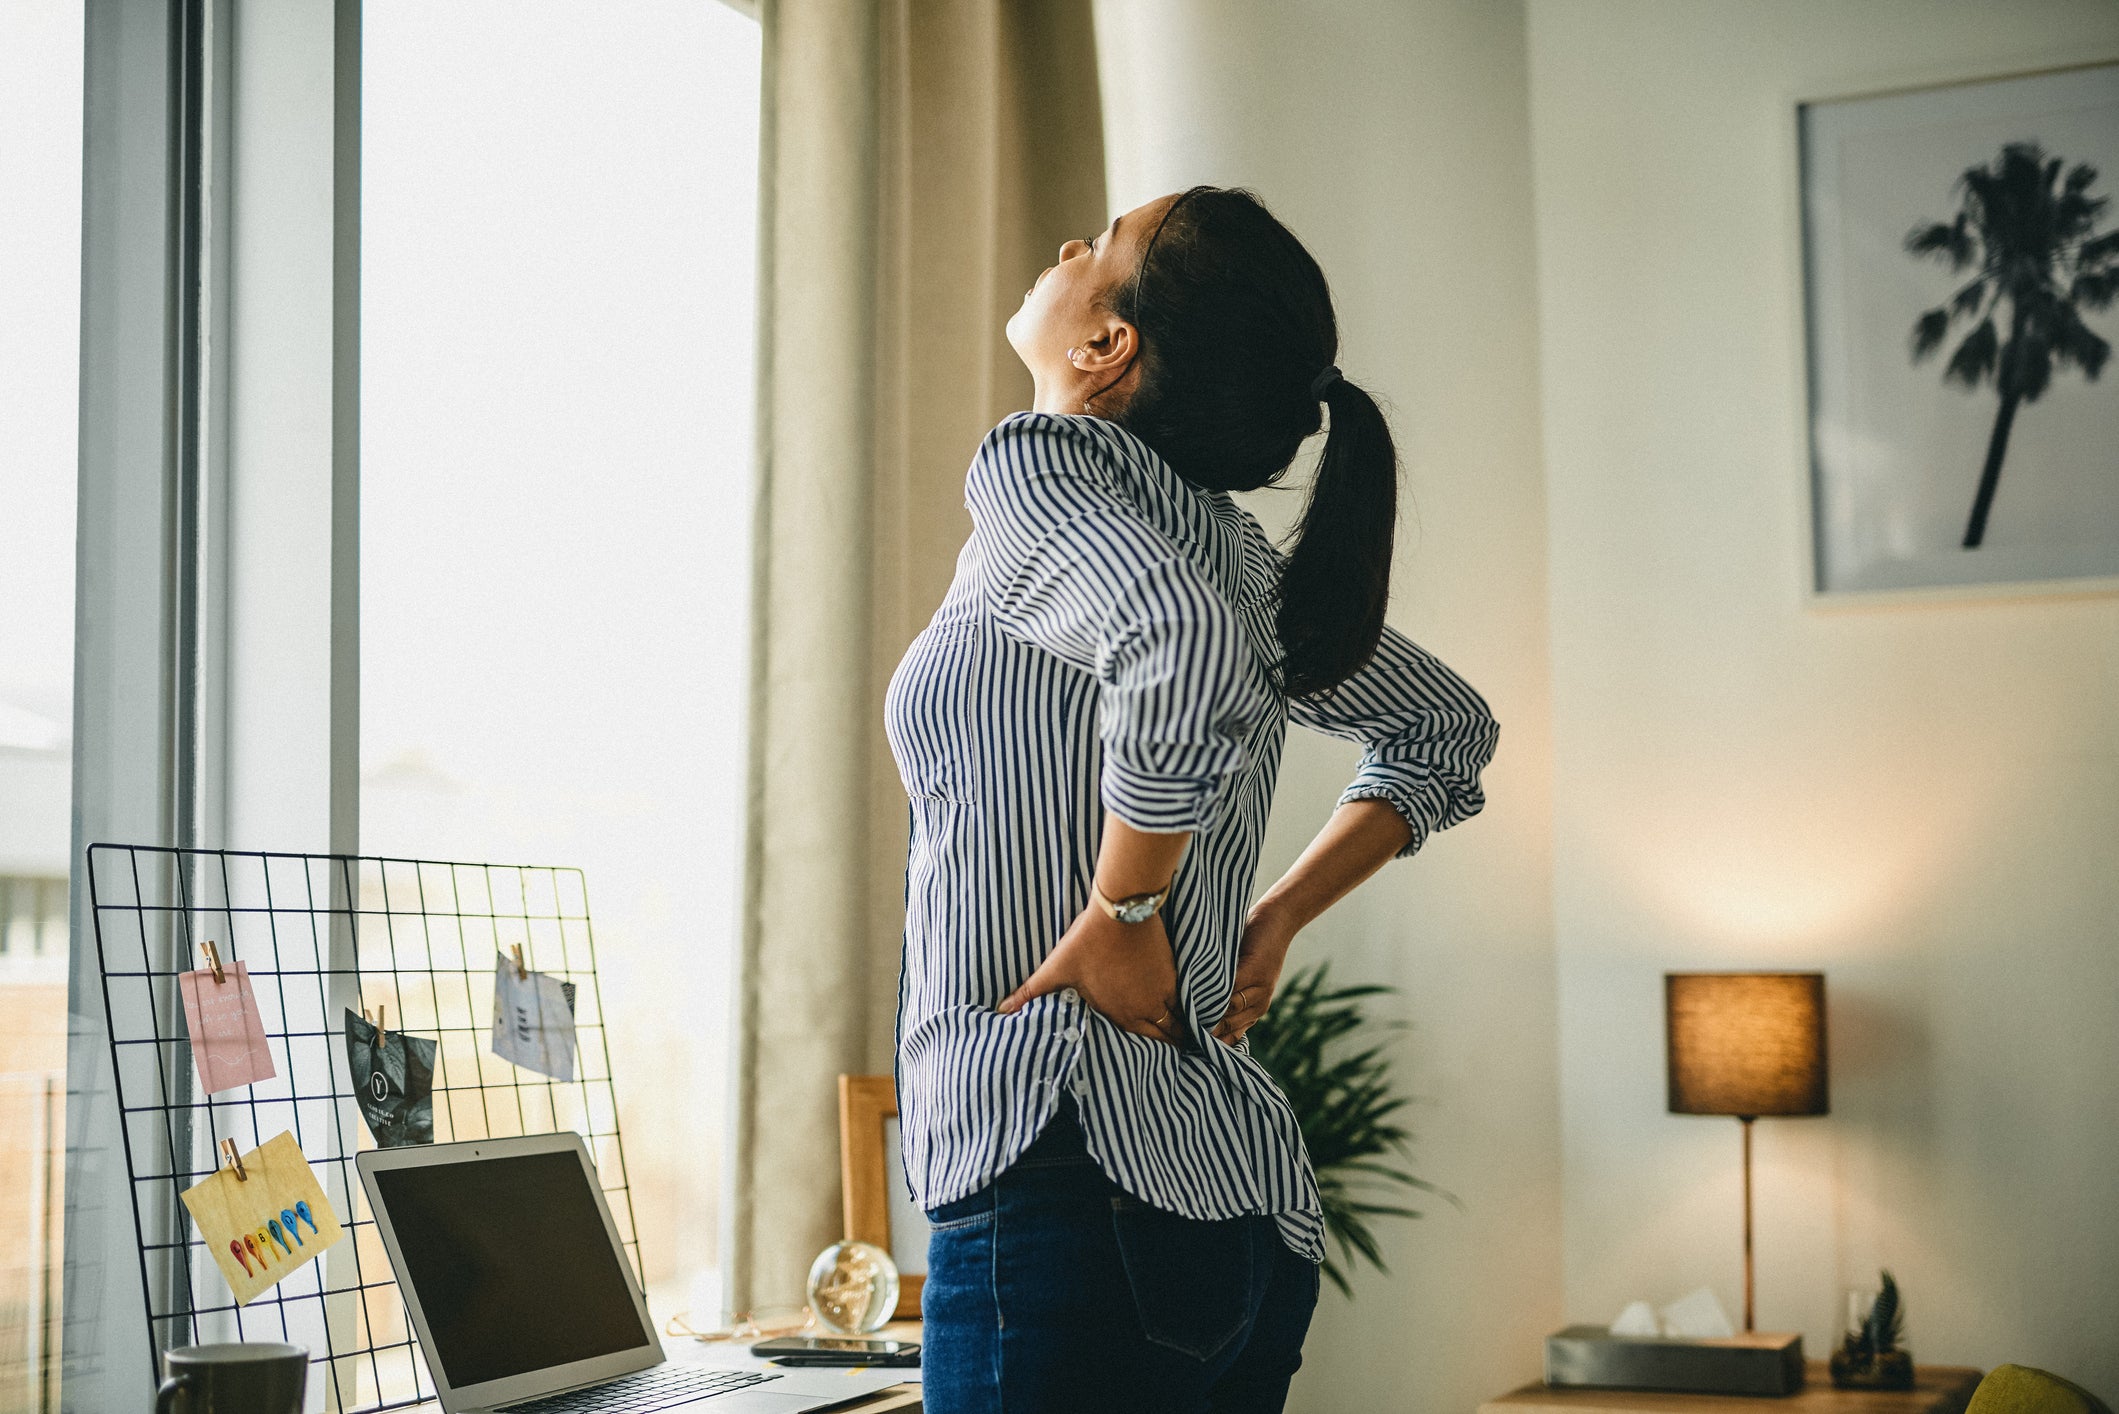 An increase in people having problems connected to their back and neck is driving the rise in long-term sick